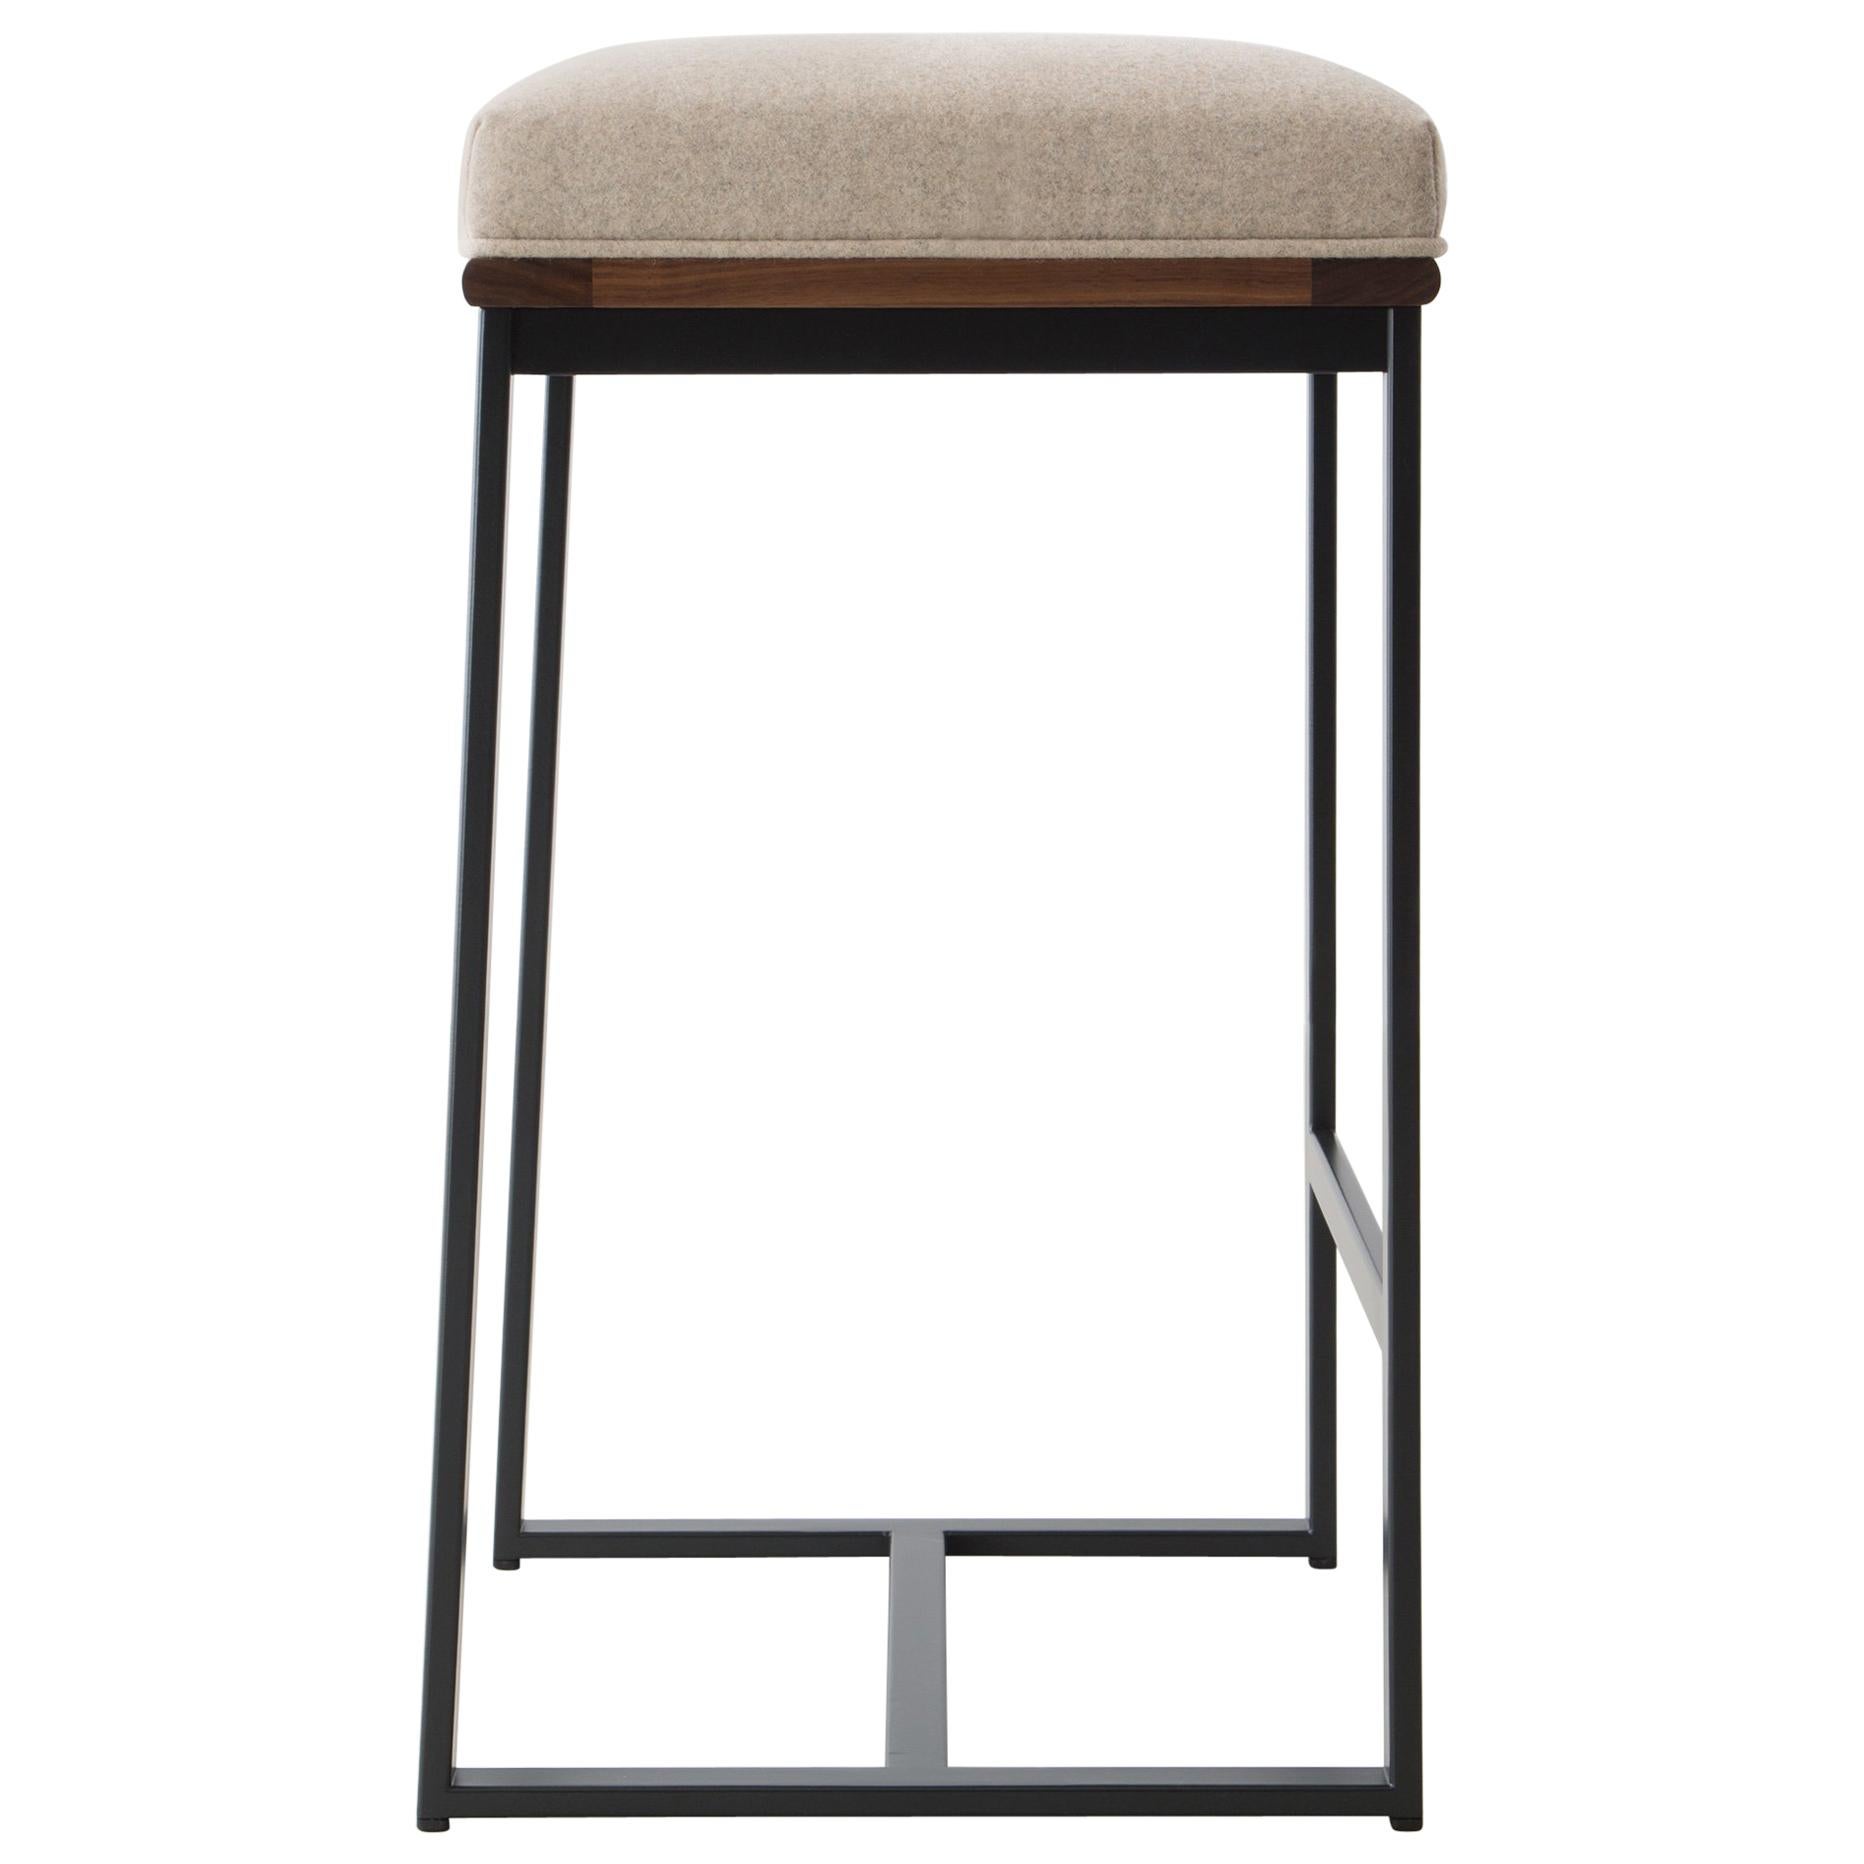 DGD Backless Counter Stool, Powder Coated Steel, Oak, Wool, Handmade in USA For Sale